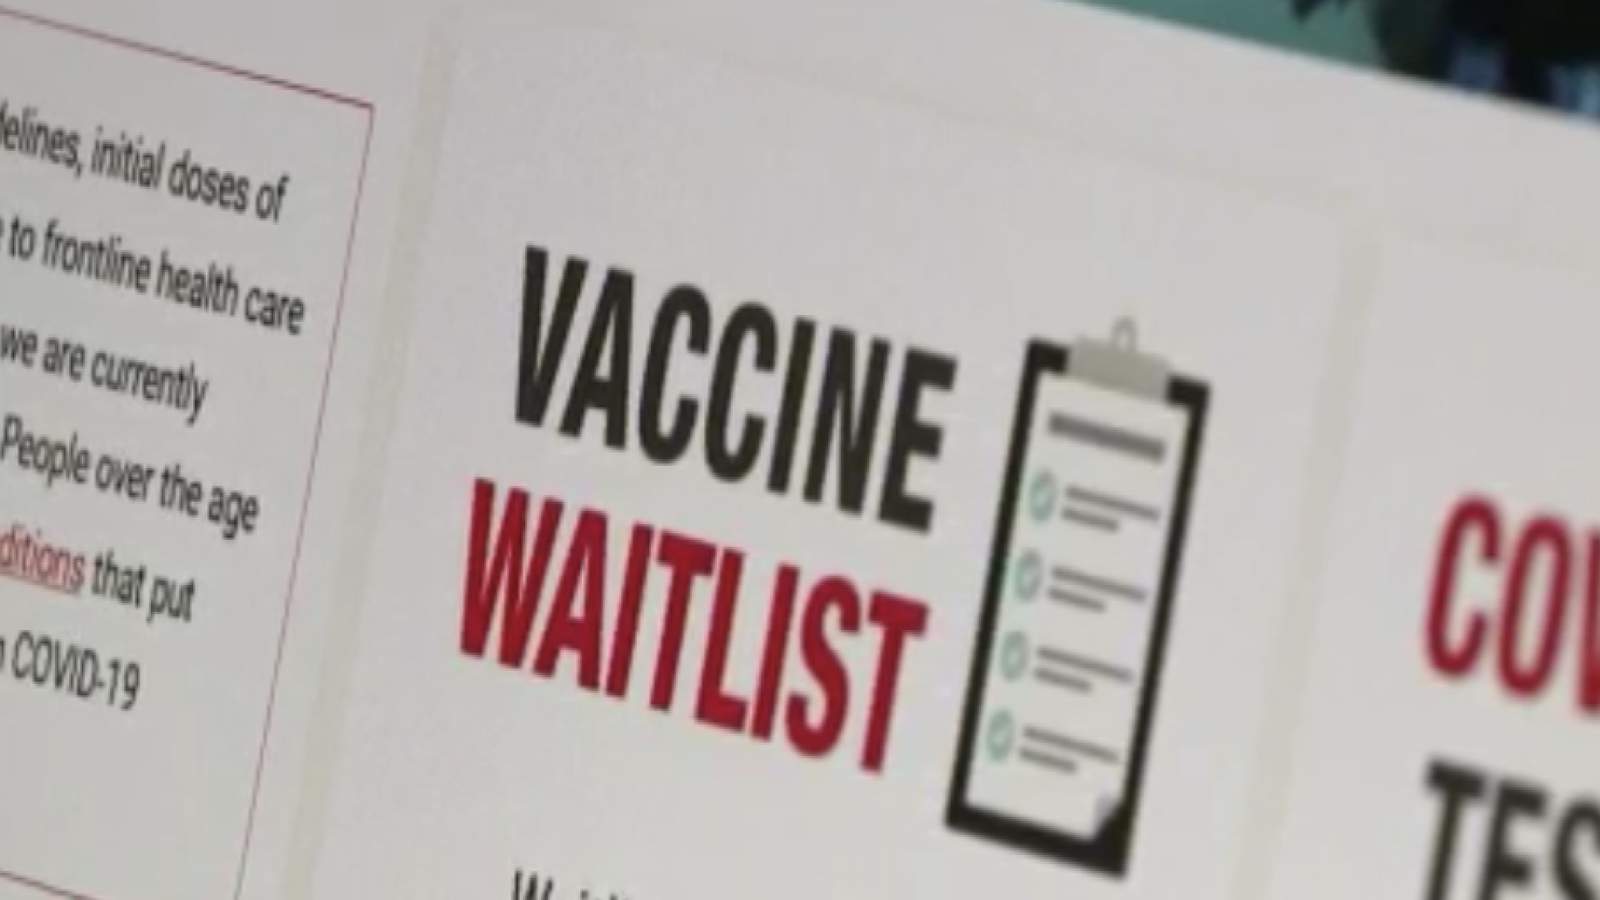 St. Clair County Health Department books 900 COVID-19 vaccine appointments for people 65 and older